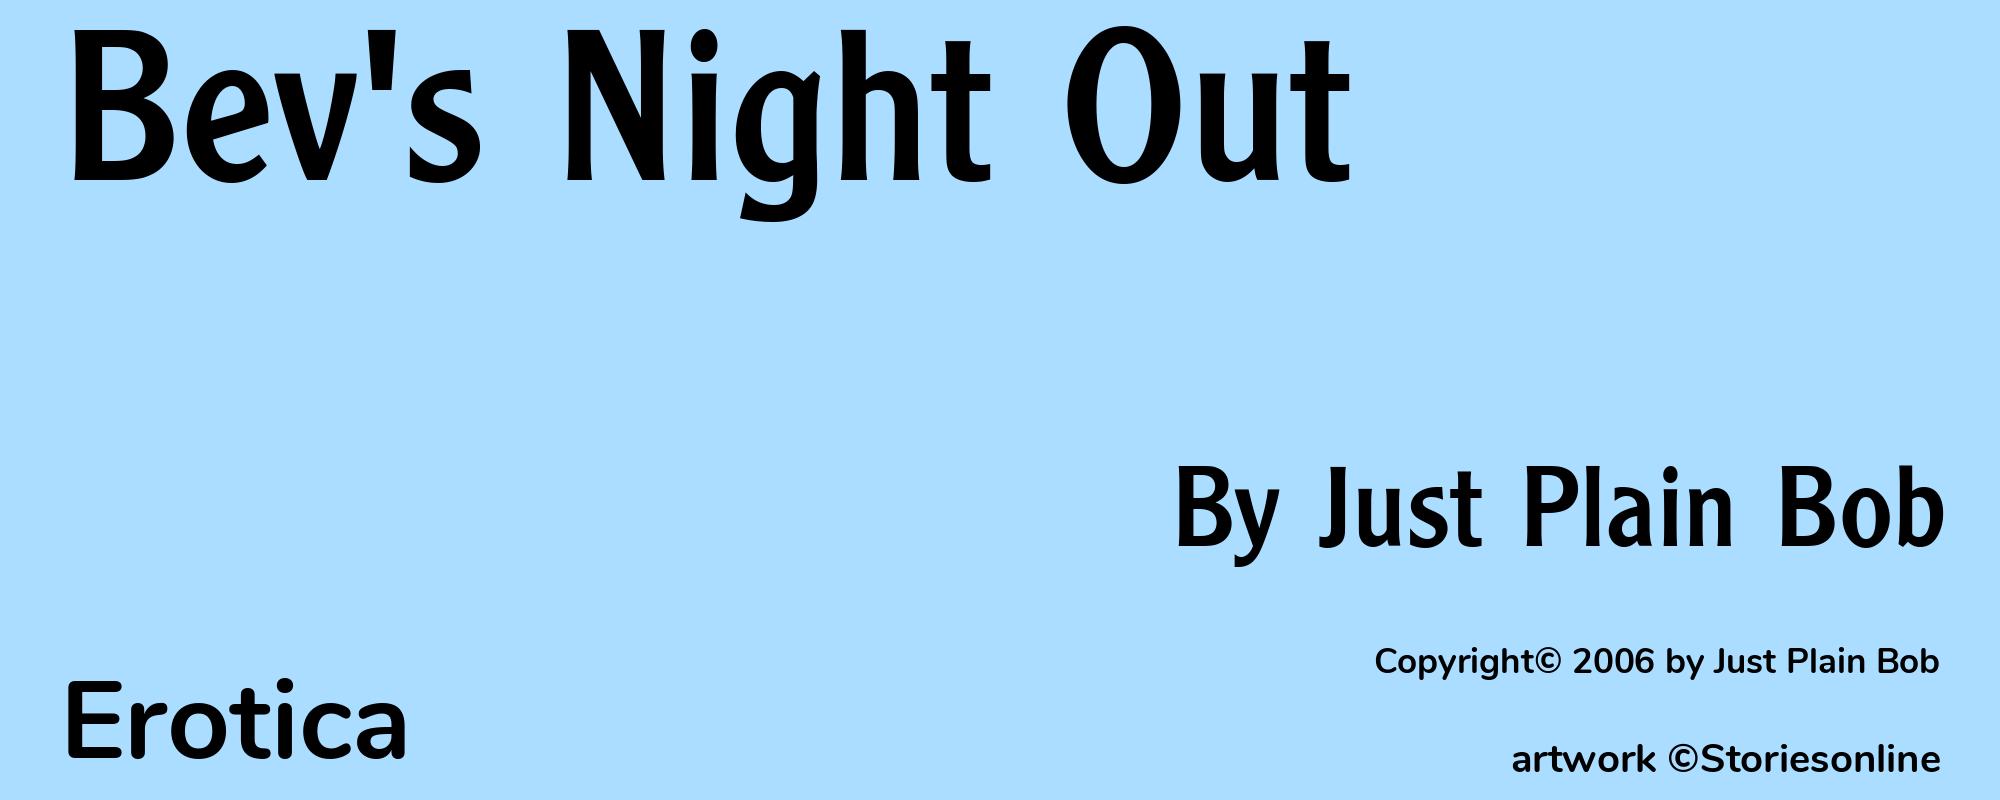 Bev's Night Out - Cover